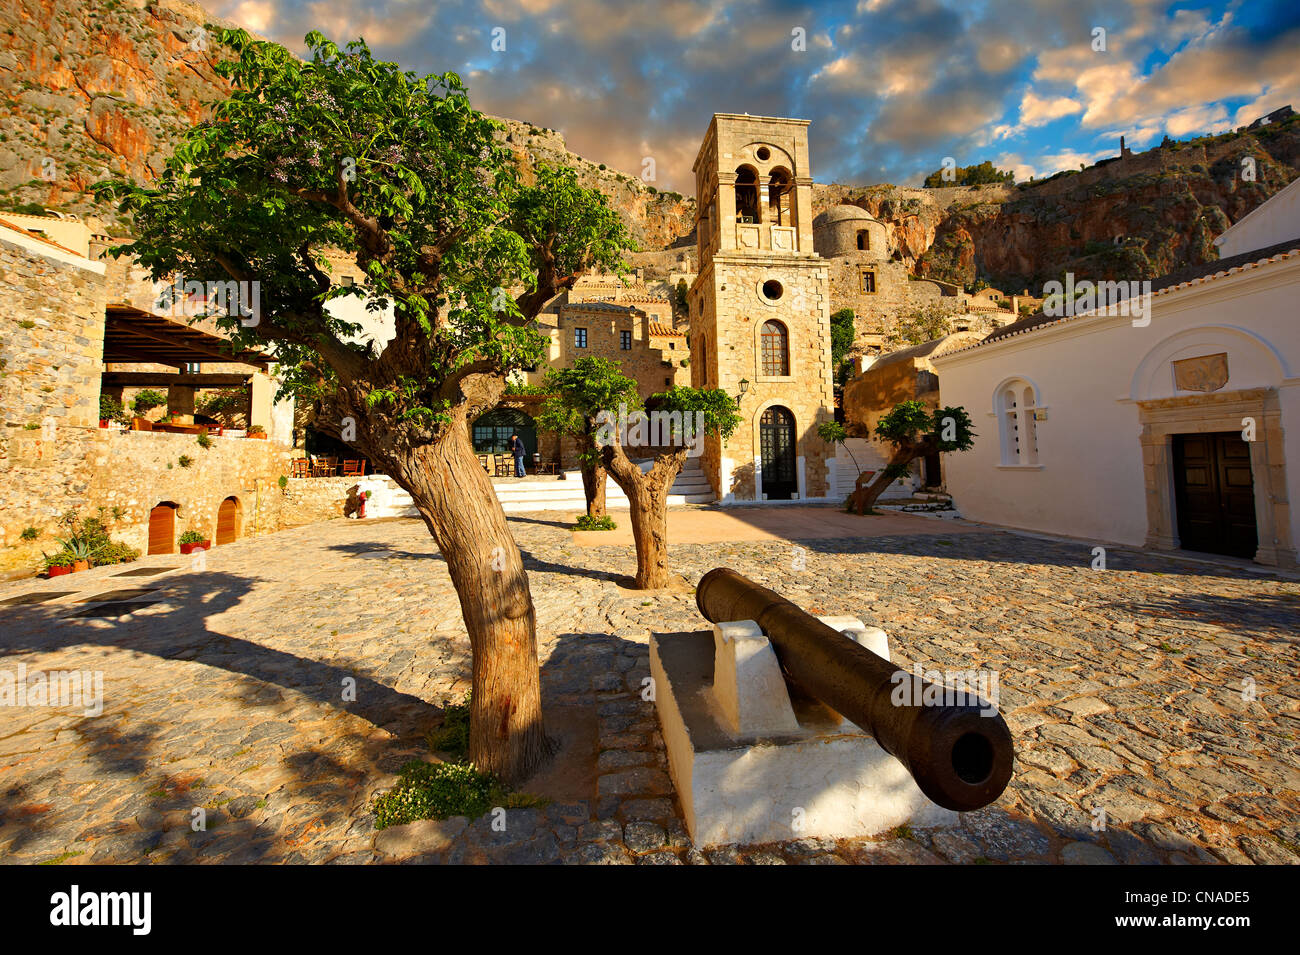 Main square of Monemvasia ( Μονεμβασία ) Byzantine Island castle town with acropolis on the plateau. Peloponnese, Greece Stock Photo